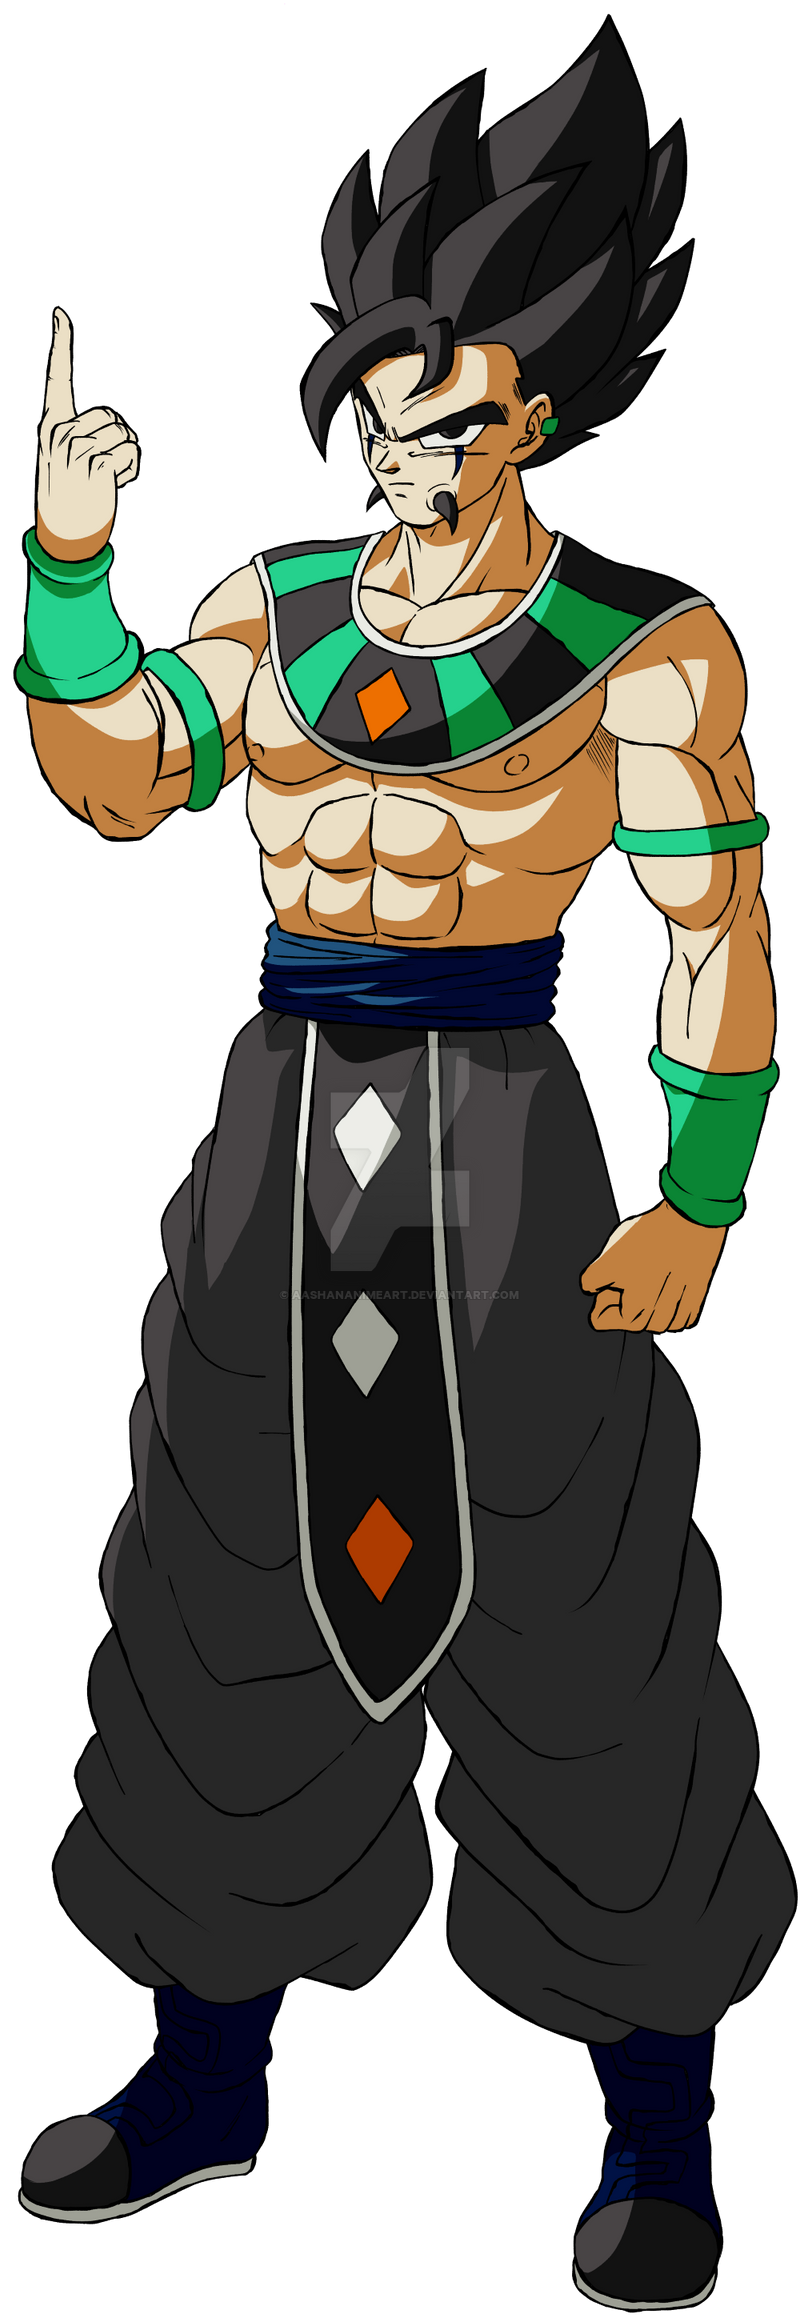 Dragon Ball Super: Broly- Manga Style by Anorkius-TheNERX on DeviantArt